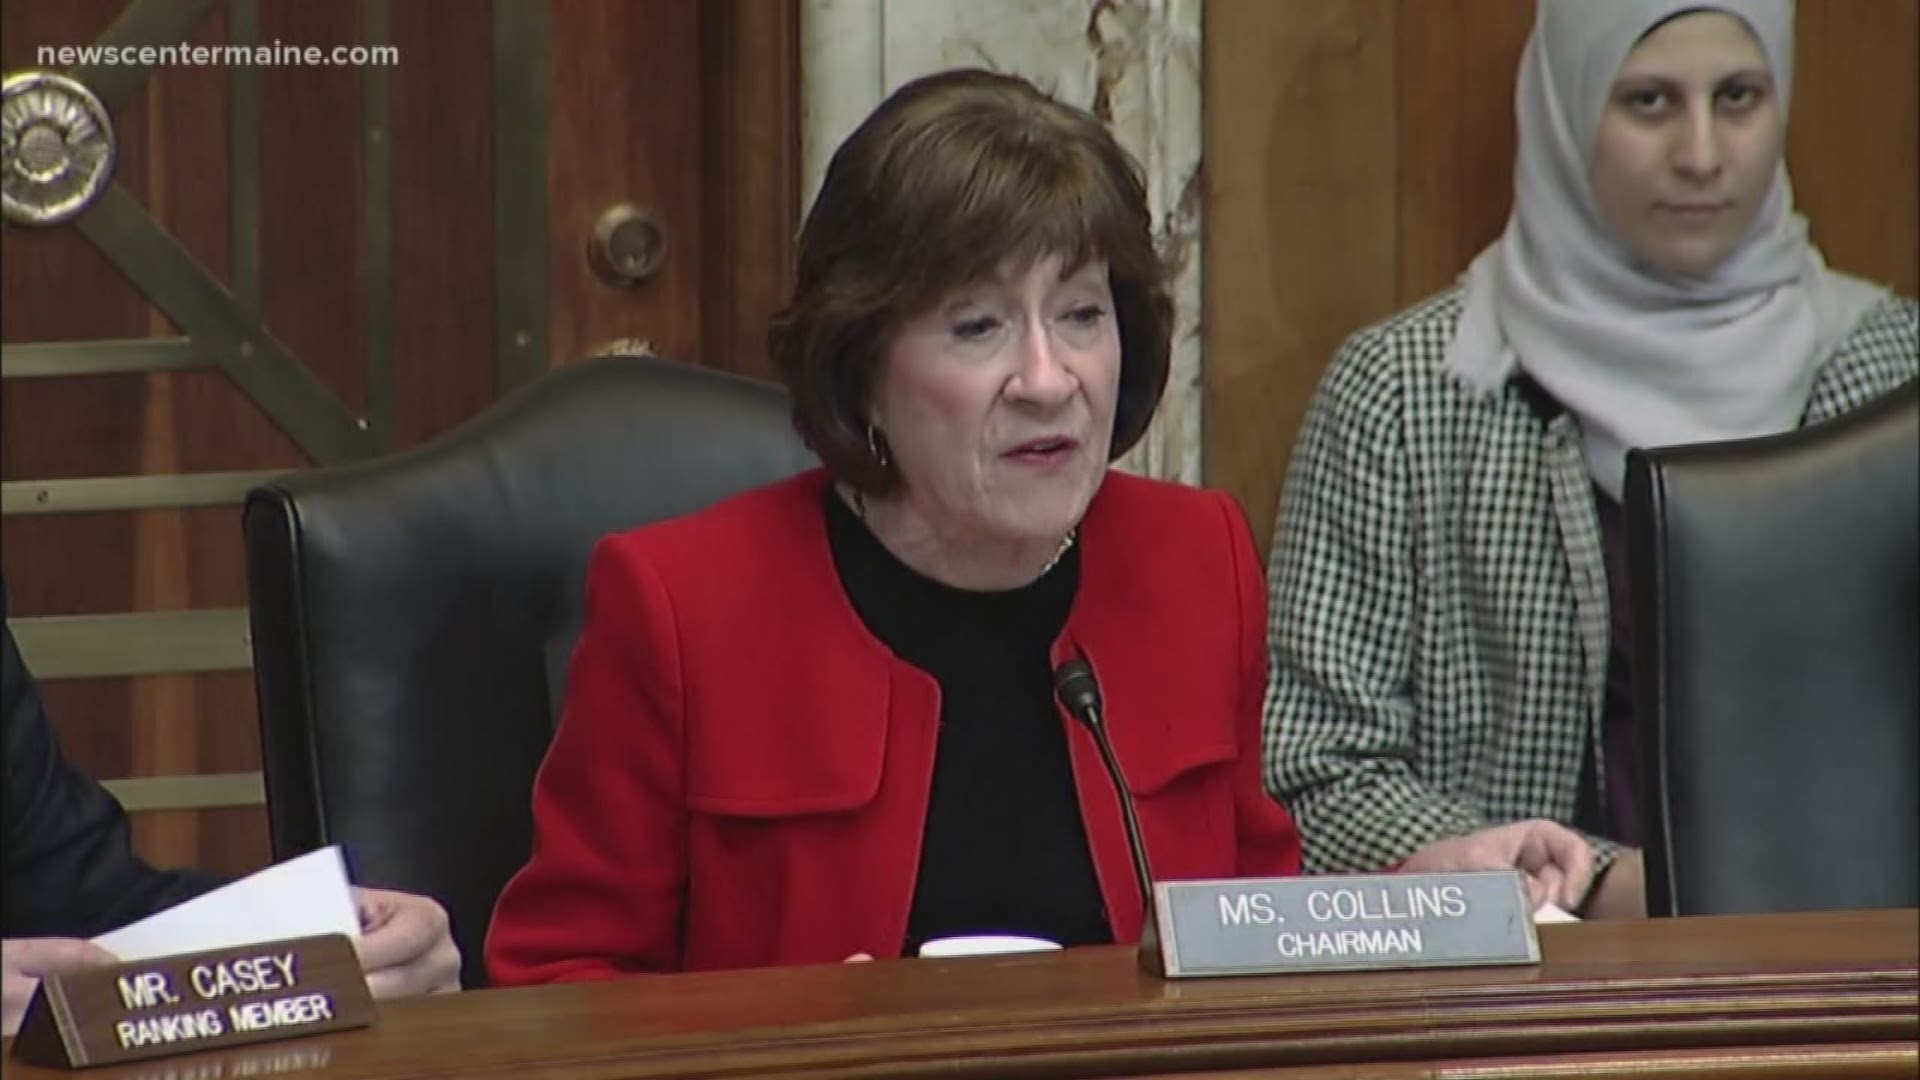 Sen. Collins has introduced legislation that would keep drug companies from "gaming" the patent system.